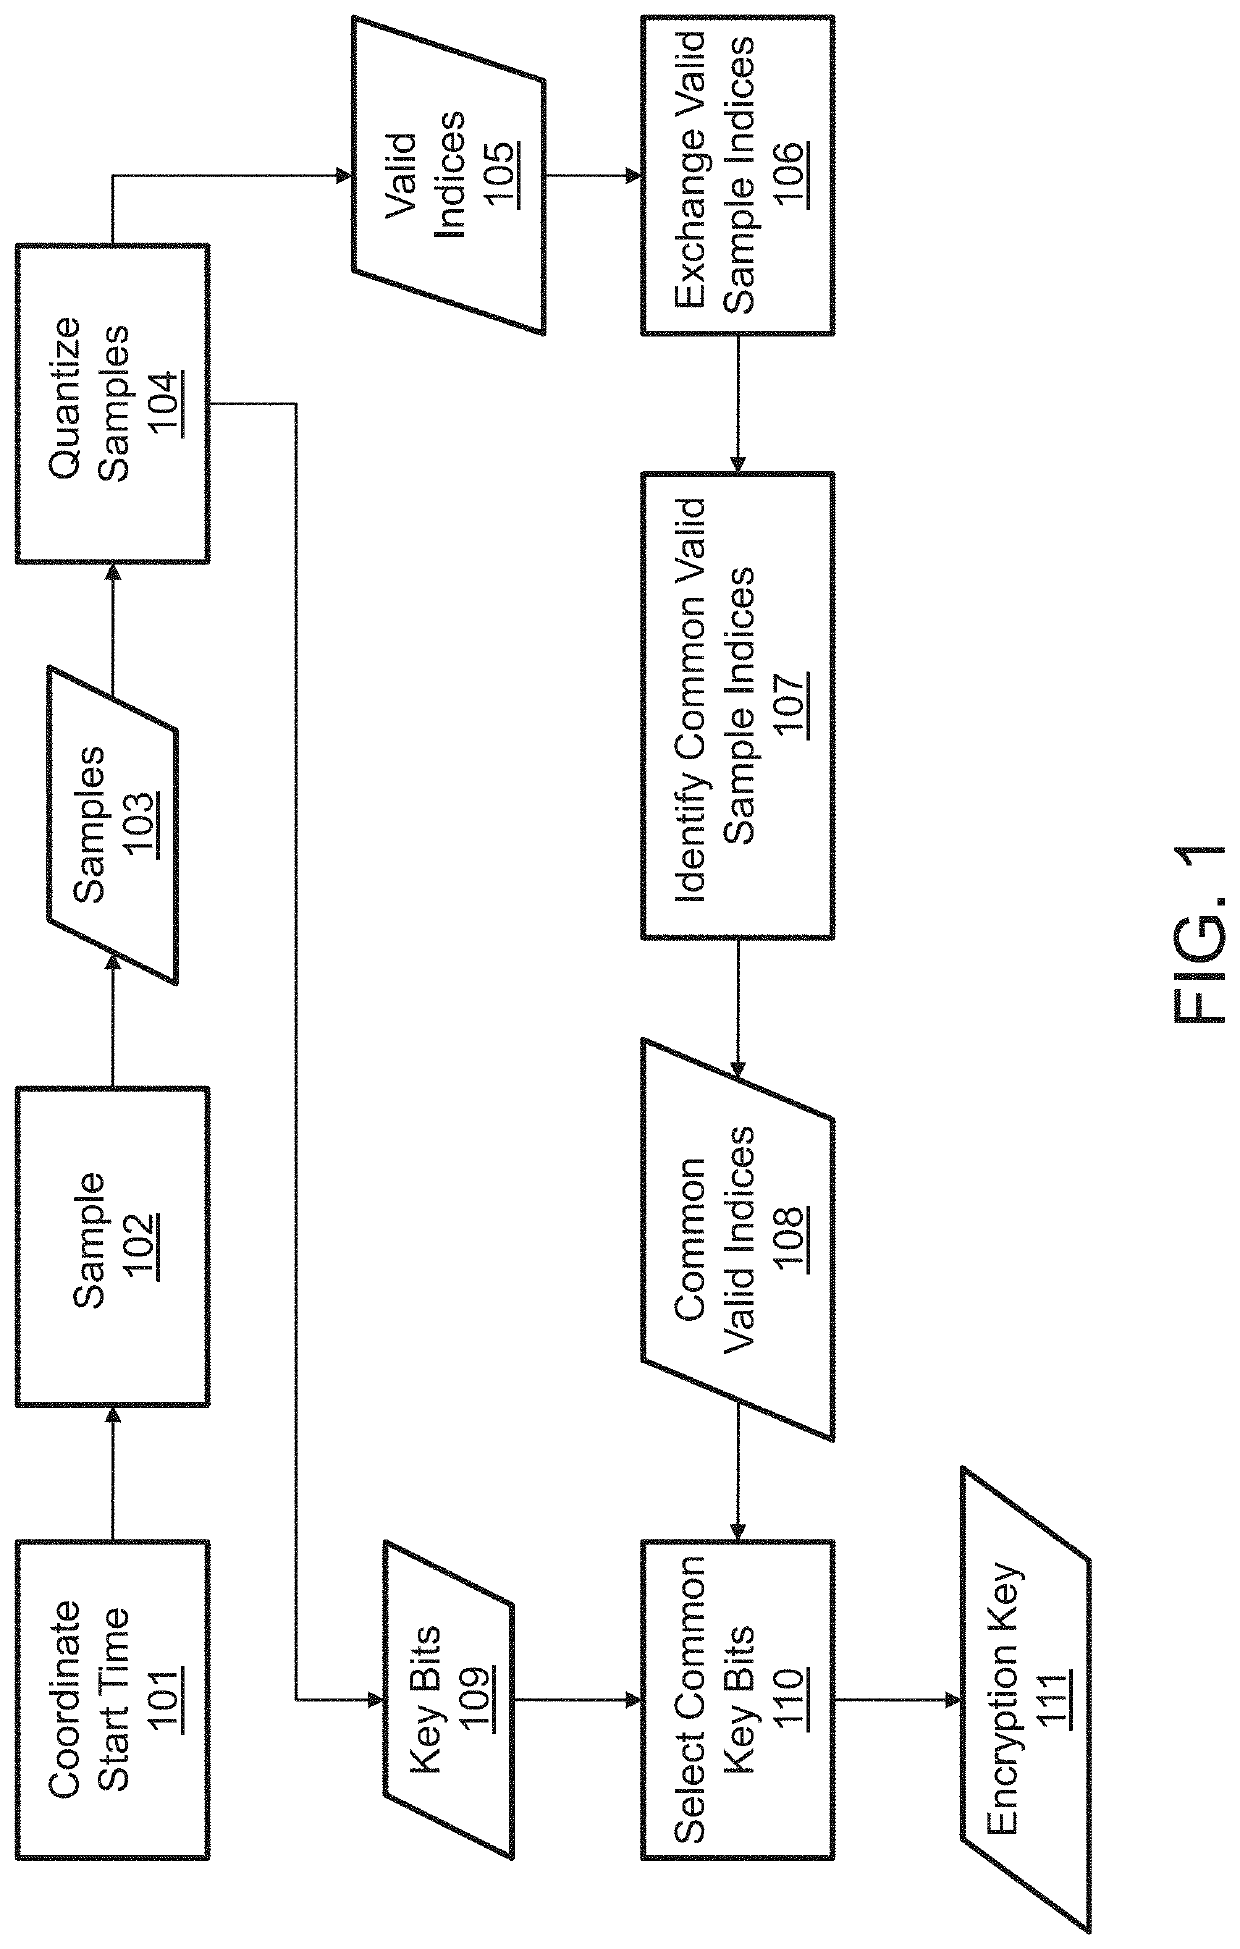 Systems and methods for encrypting communication between vehicles